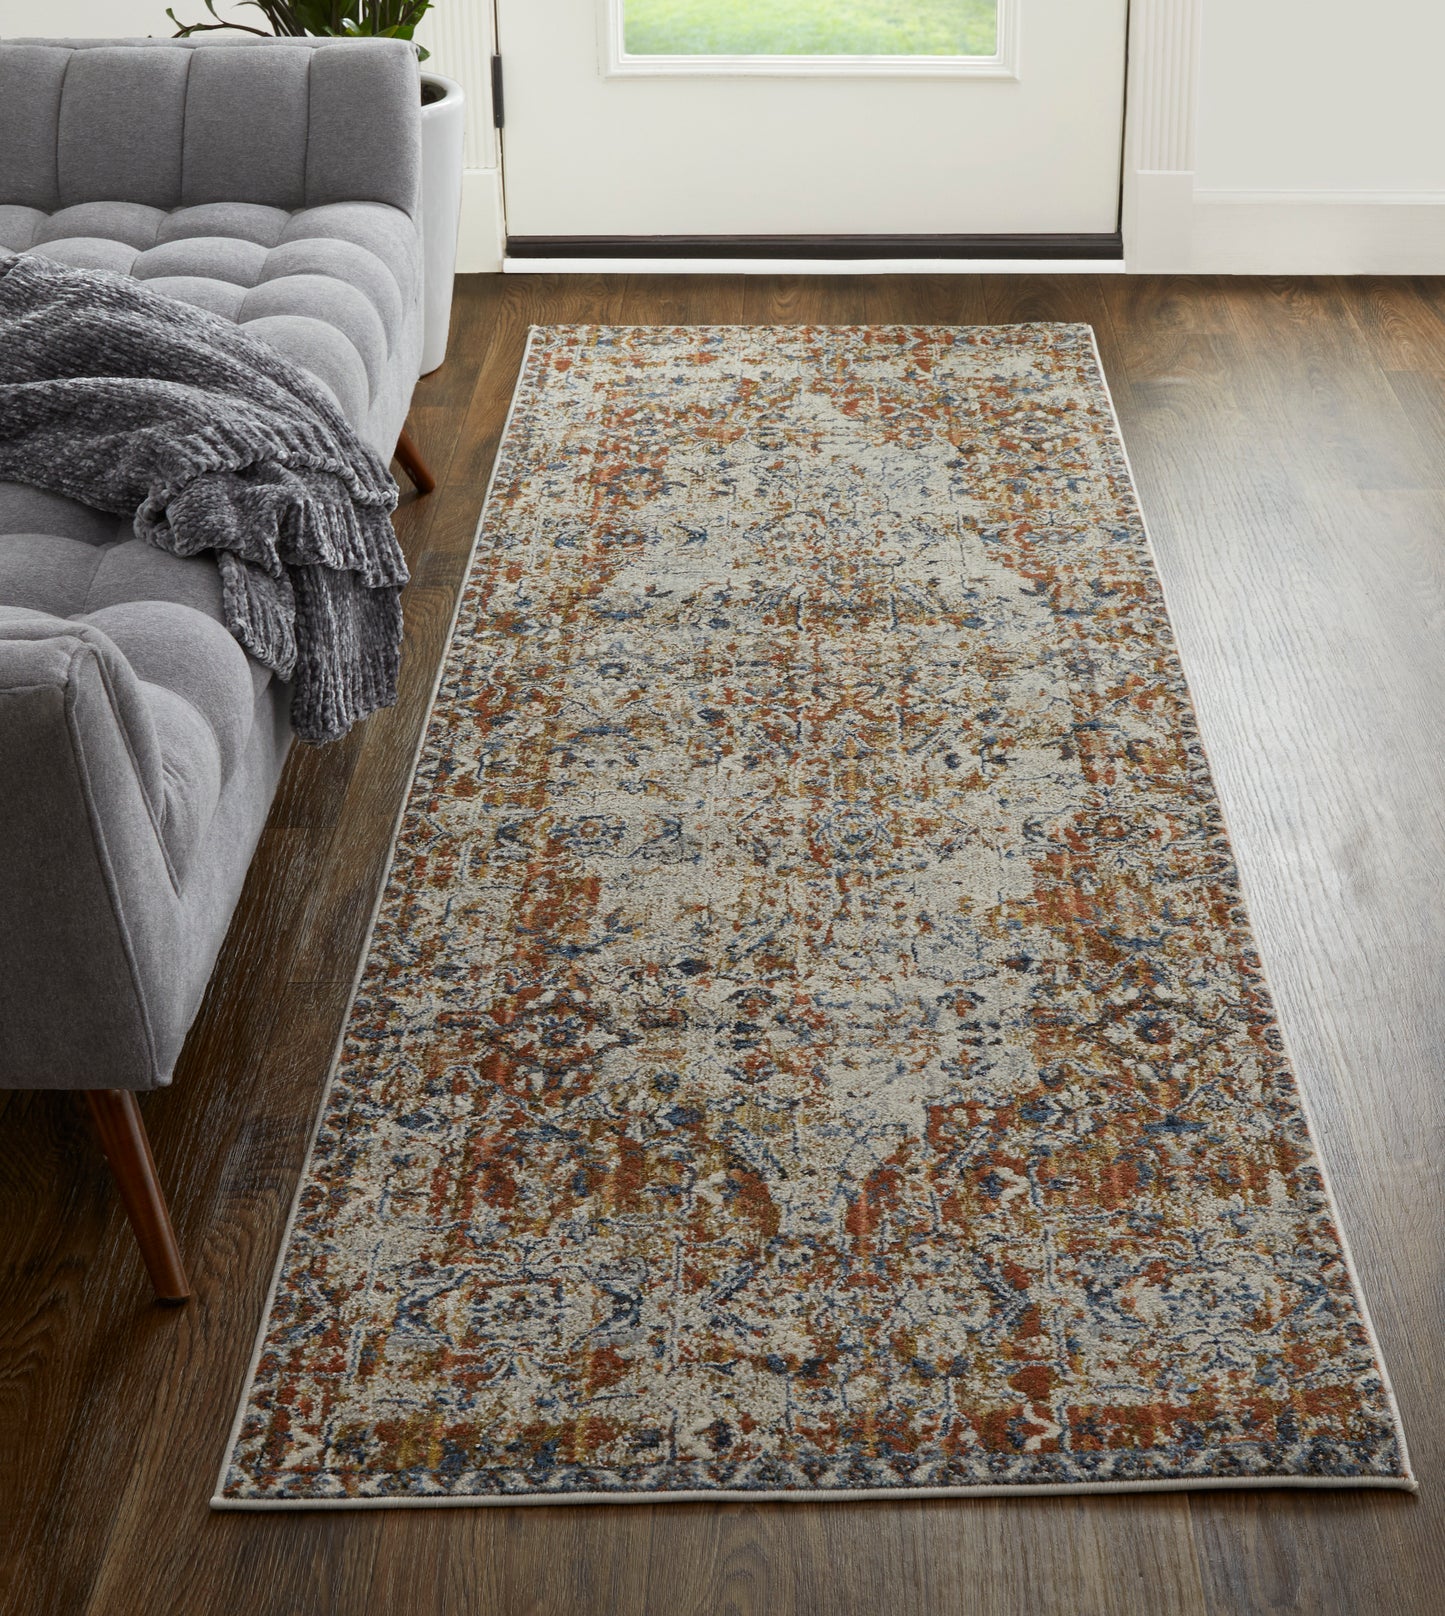 Kaia 39HVF Power Loomed Synthetic Blend Indoor Area Rug by Feizy Rugs